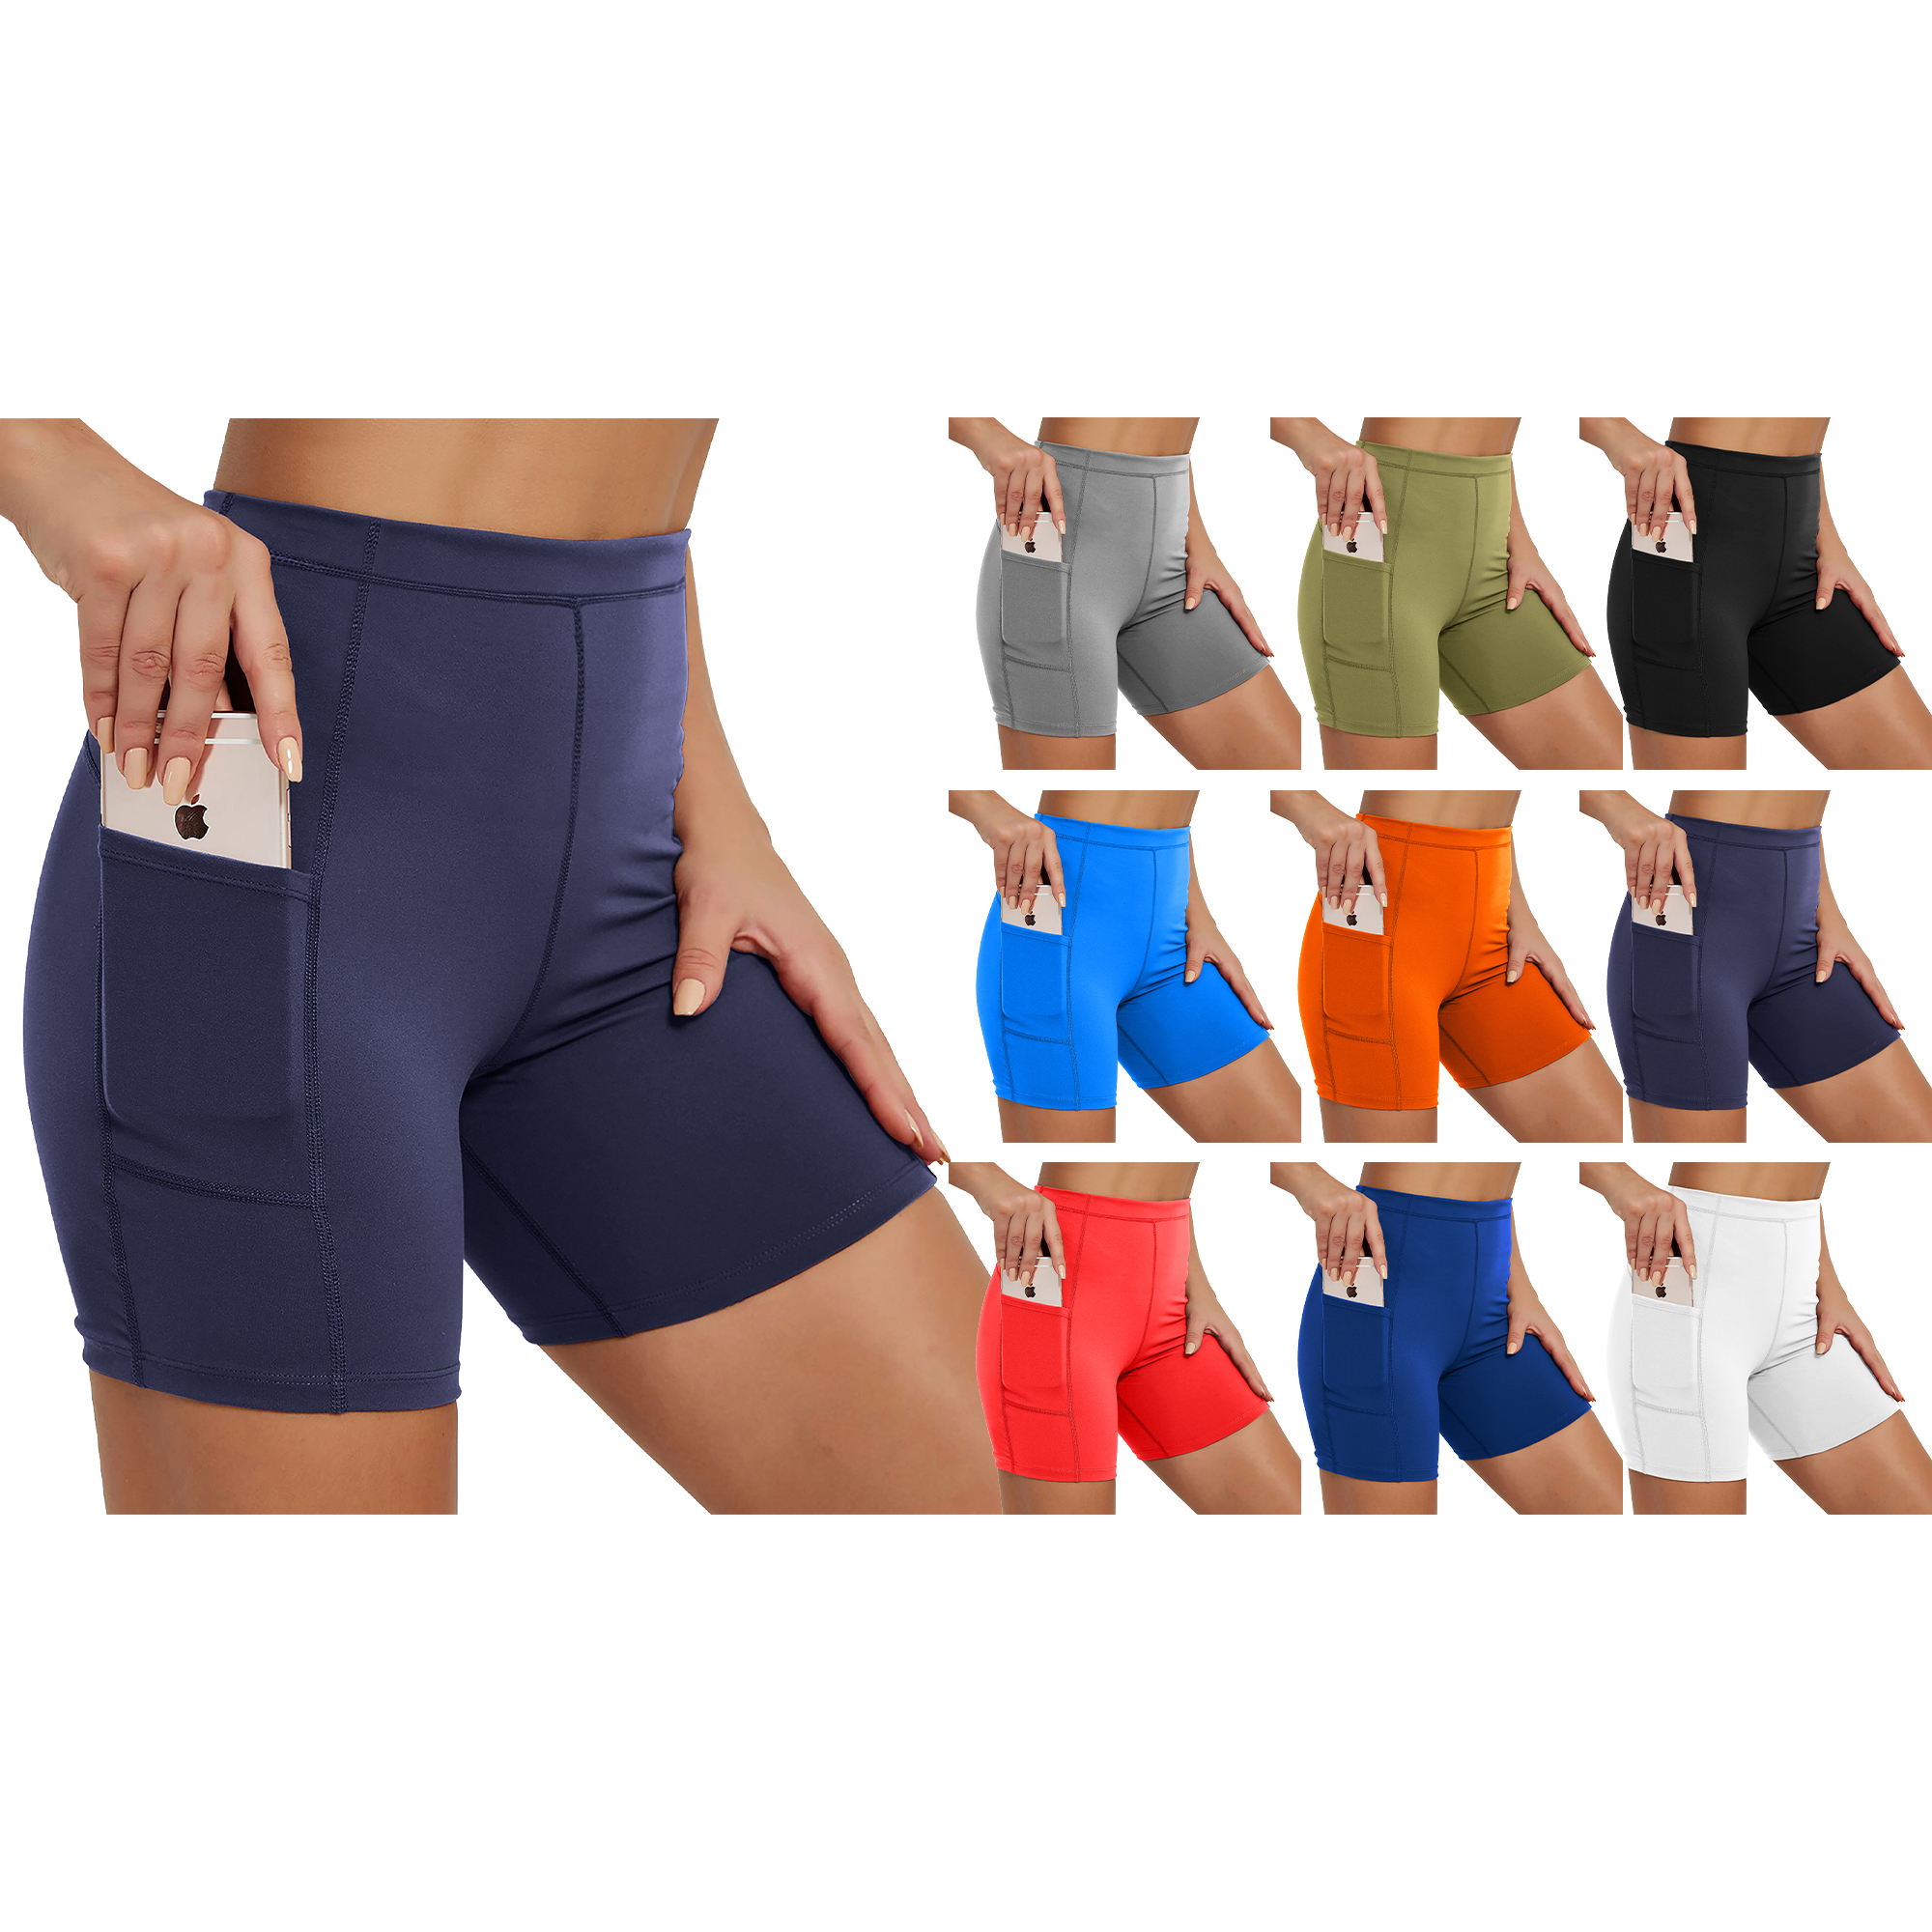 2-Pack Women's Workout Compression Training Shorts With Pocket Moisture Wicking Soft Solid Active Wear Bottoms For Fitness Gym Yoga Wear - L